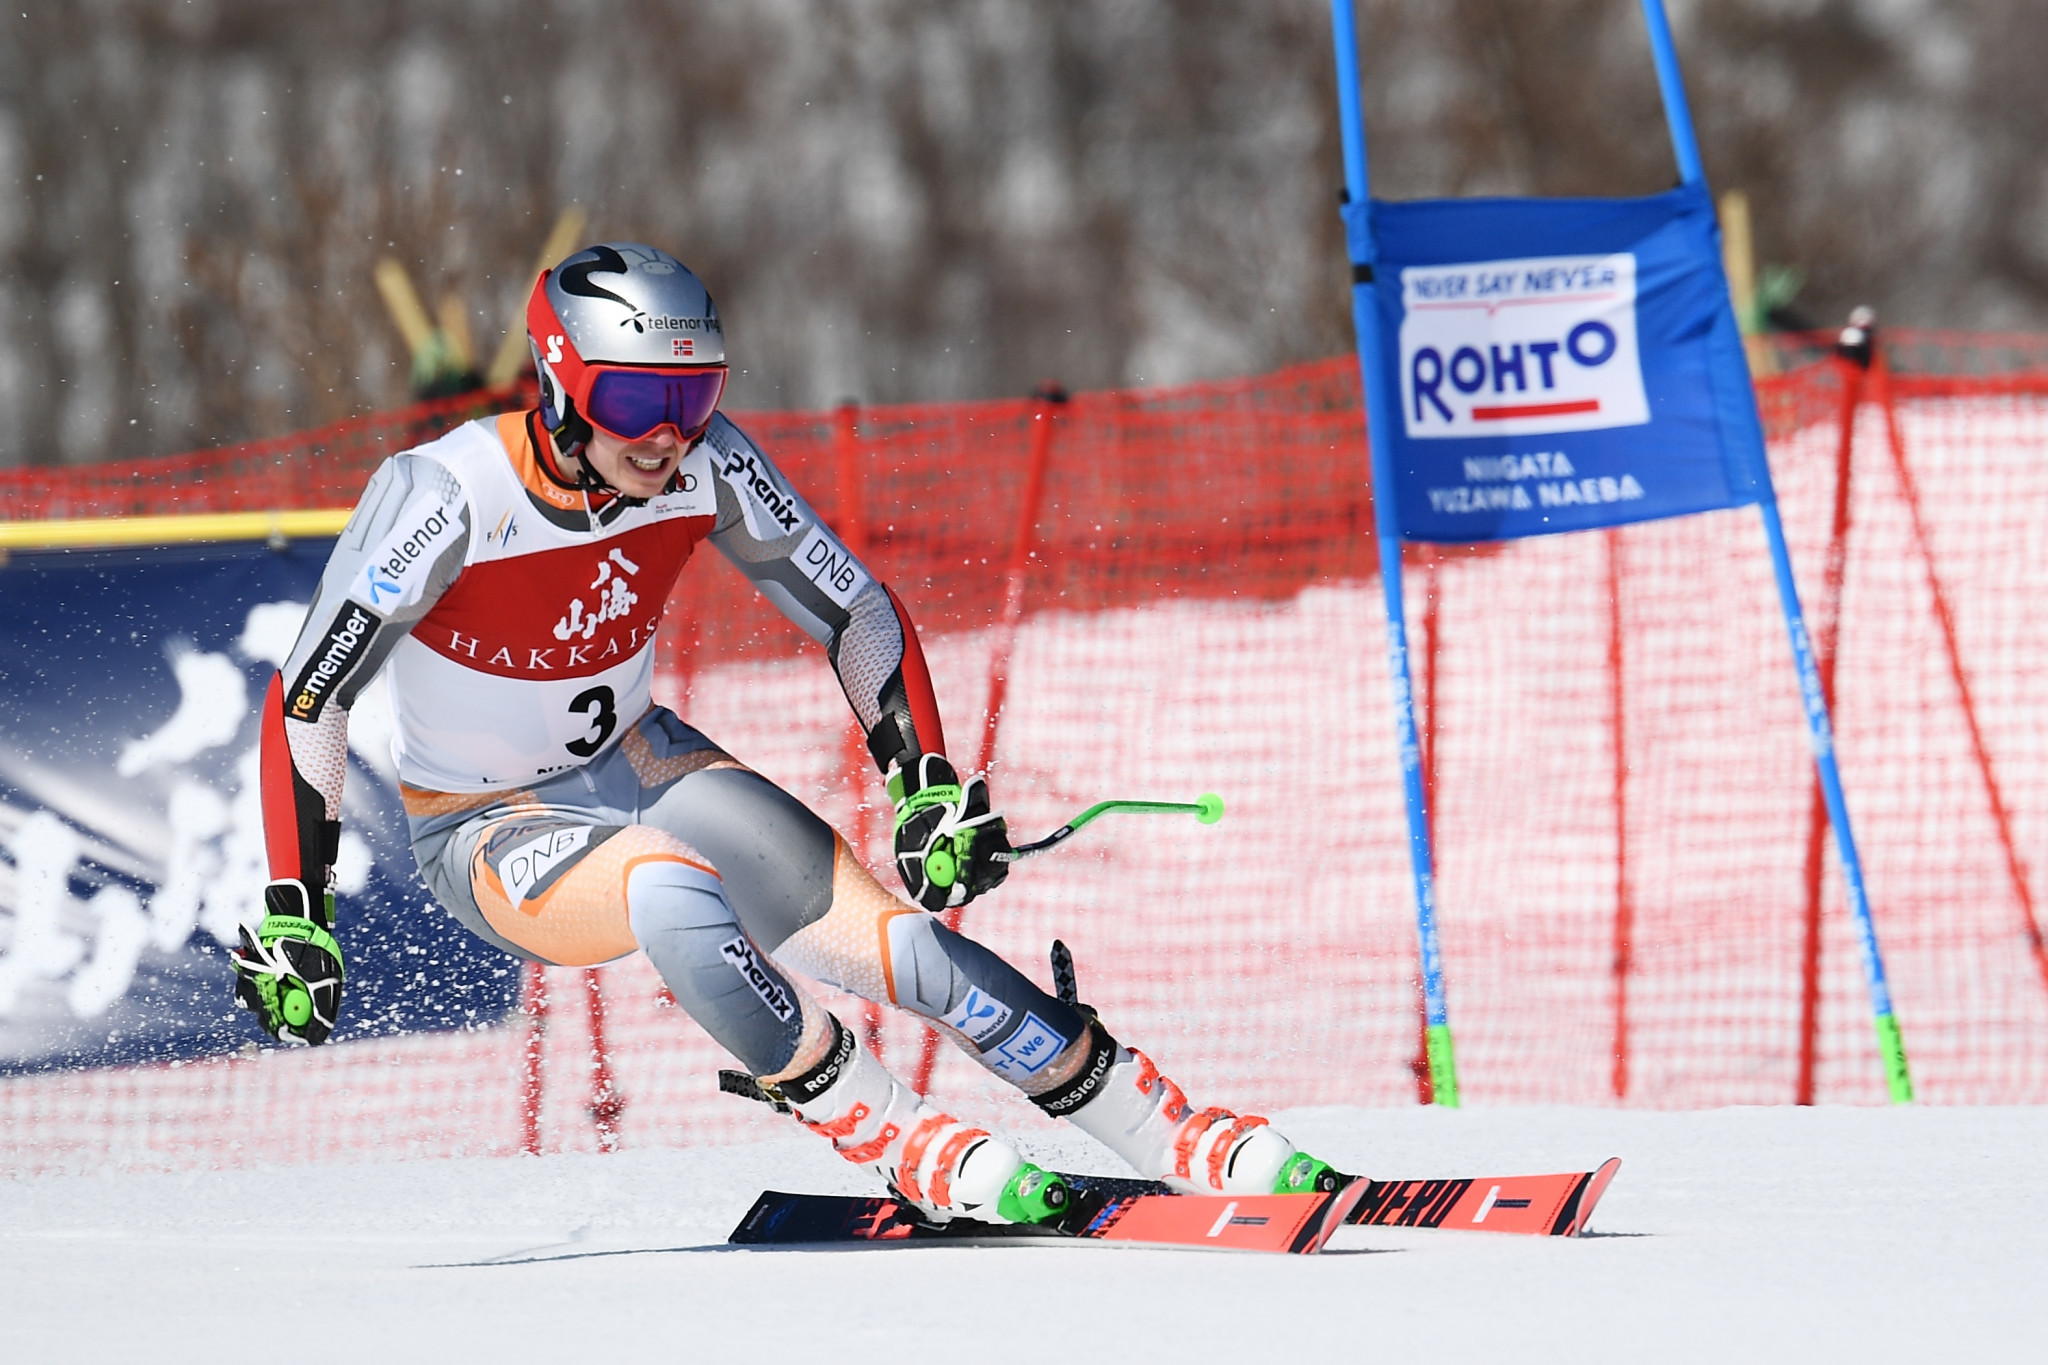 Henrik Kristoffersen led after the first run but ultimately finished fifth ©Getty Images